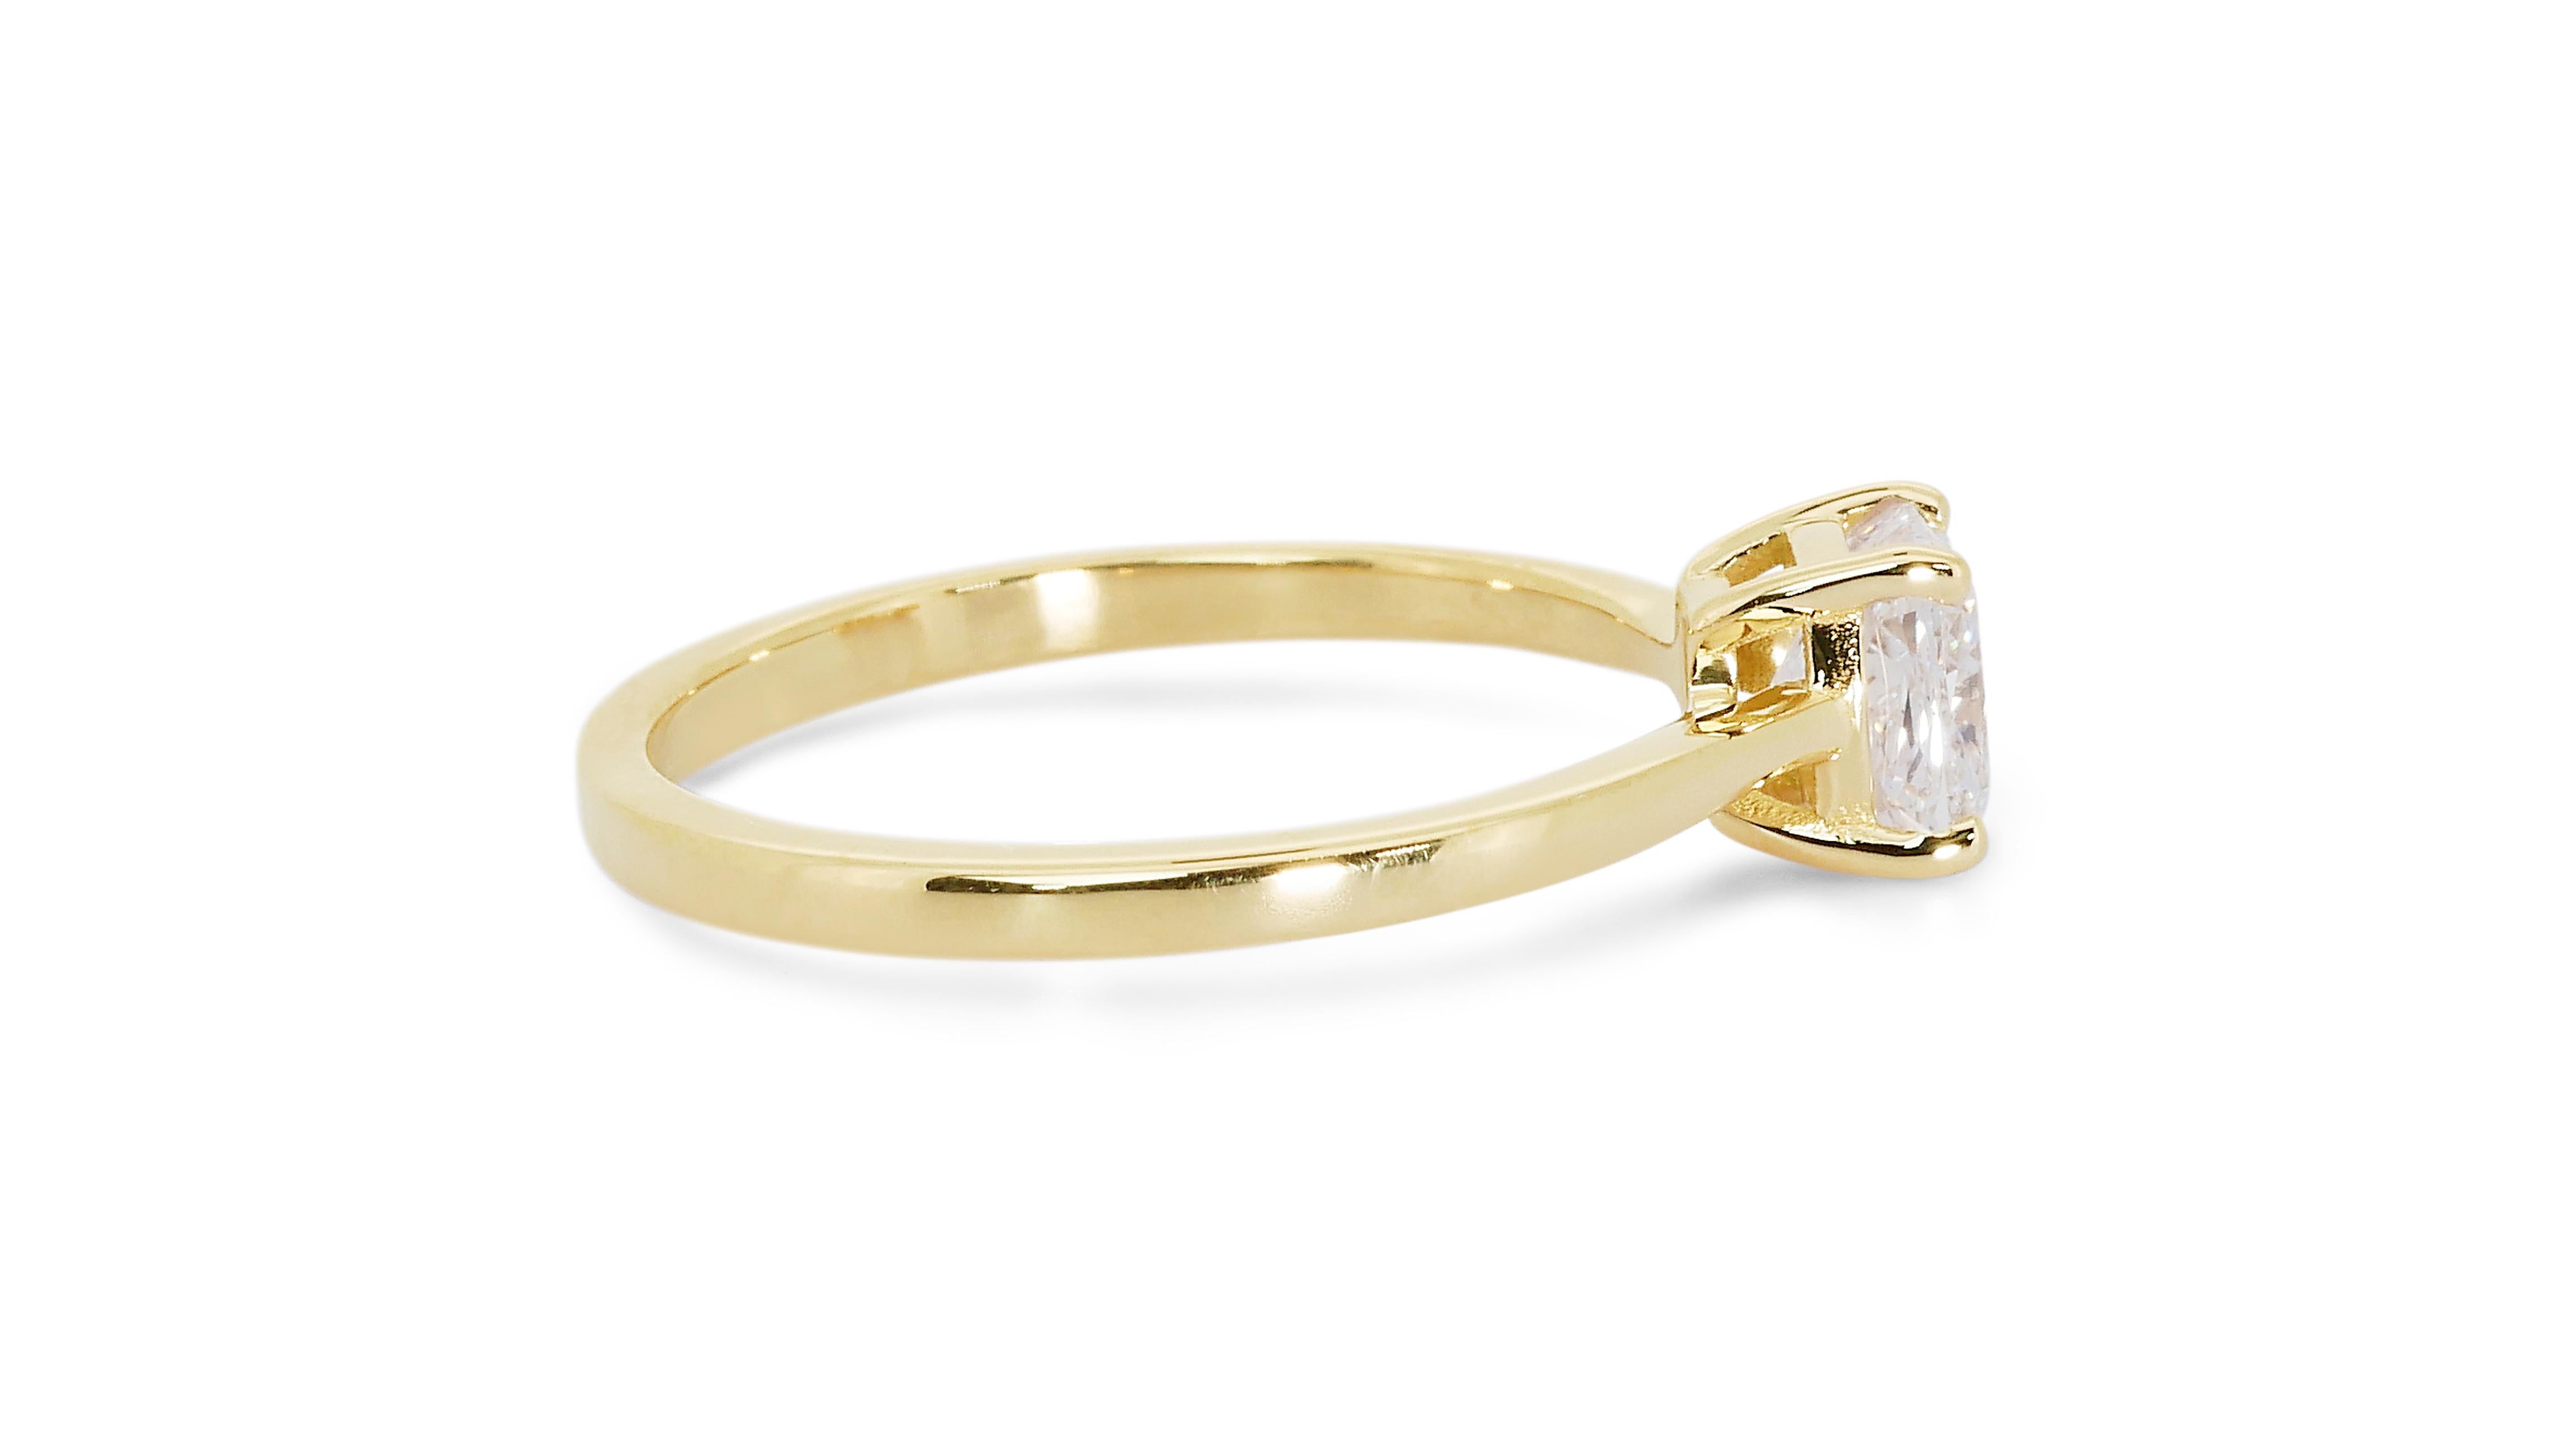 Glamorous 18k Yellow Gold Solitaire Ring w/ 0.80 ct Natural Diamonds IGI Cert For Sale 2